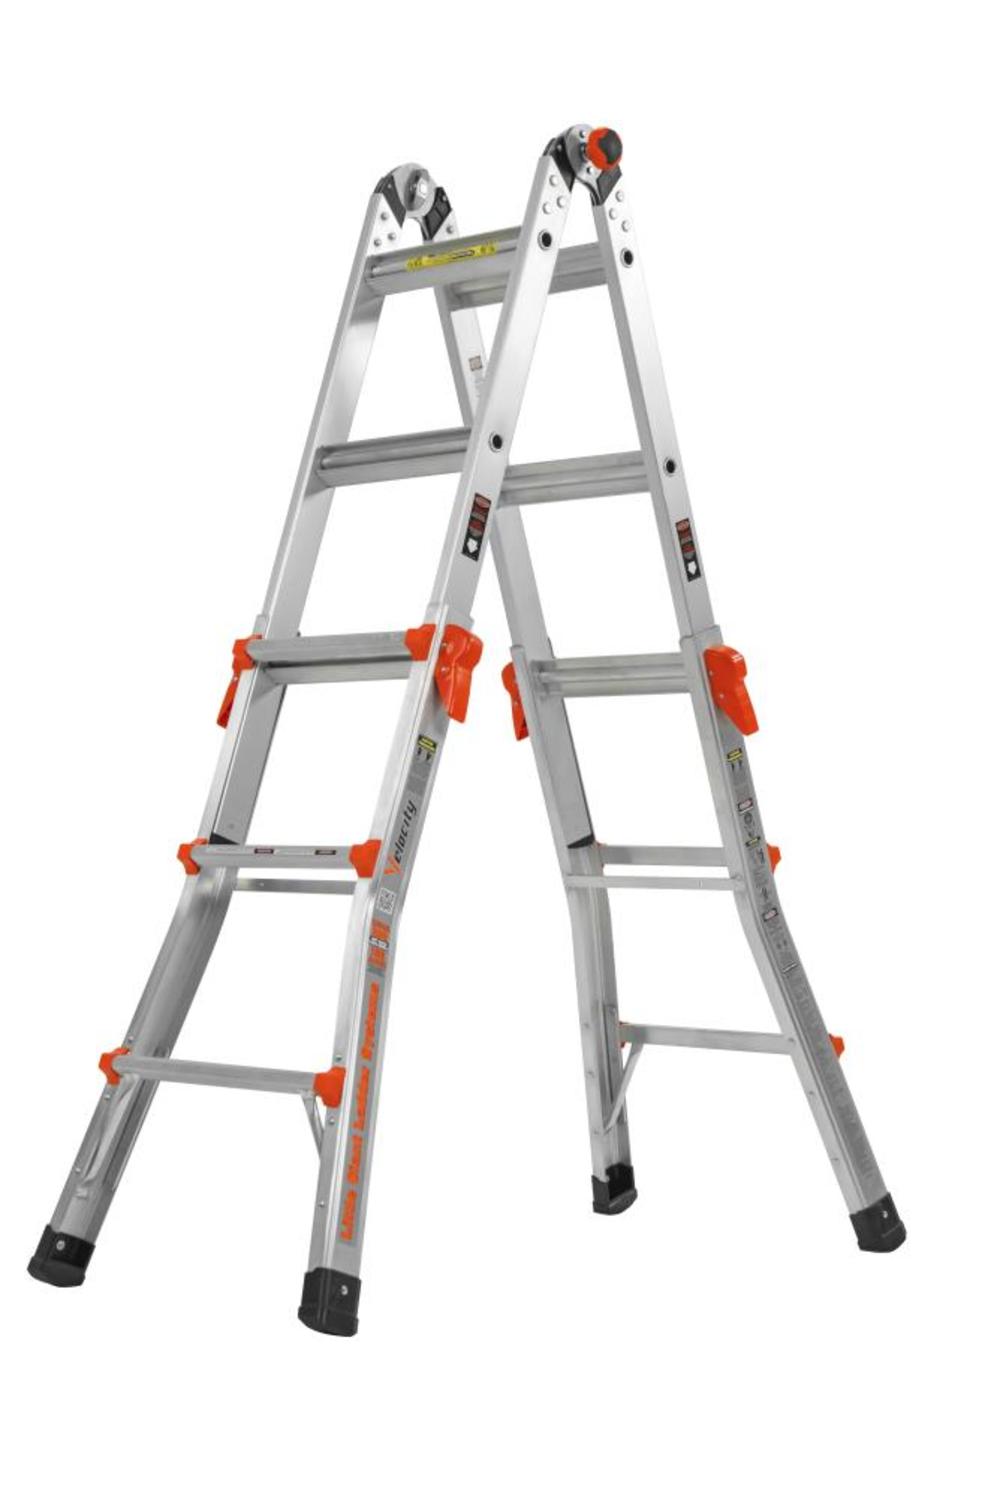 Velocity Model 13 300 lb Rated Type-1A Multi-Use Ladder - 15413 